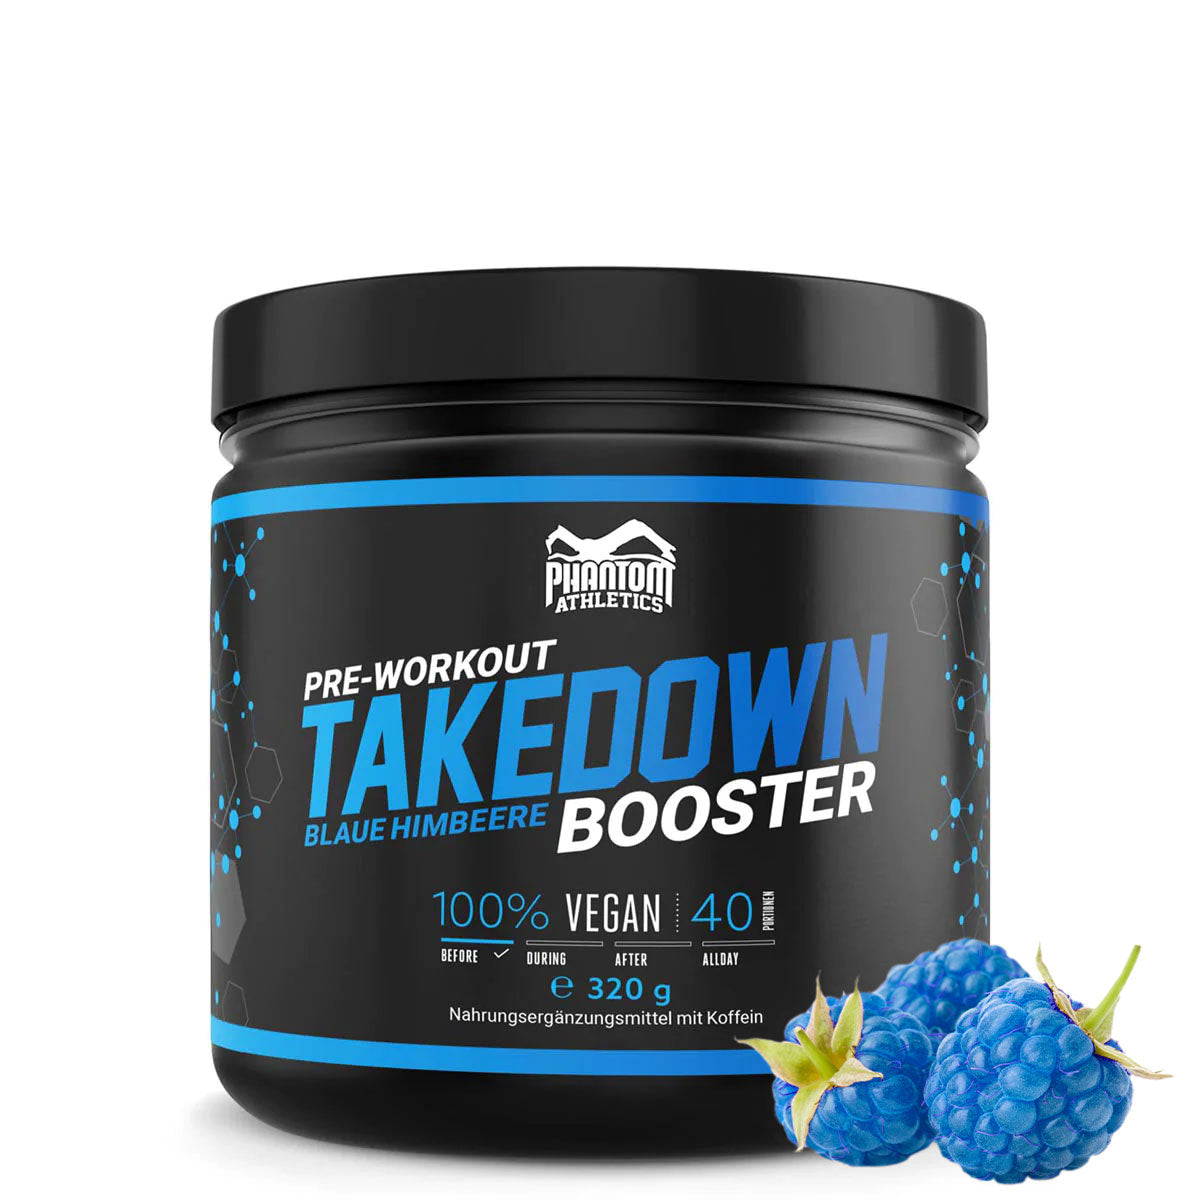 Phantom TAKEDOWN pre-workout booster for more power in martial arts.